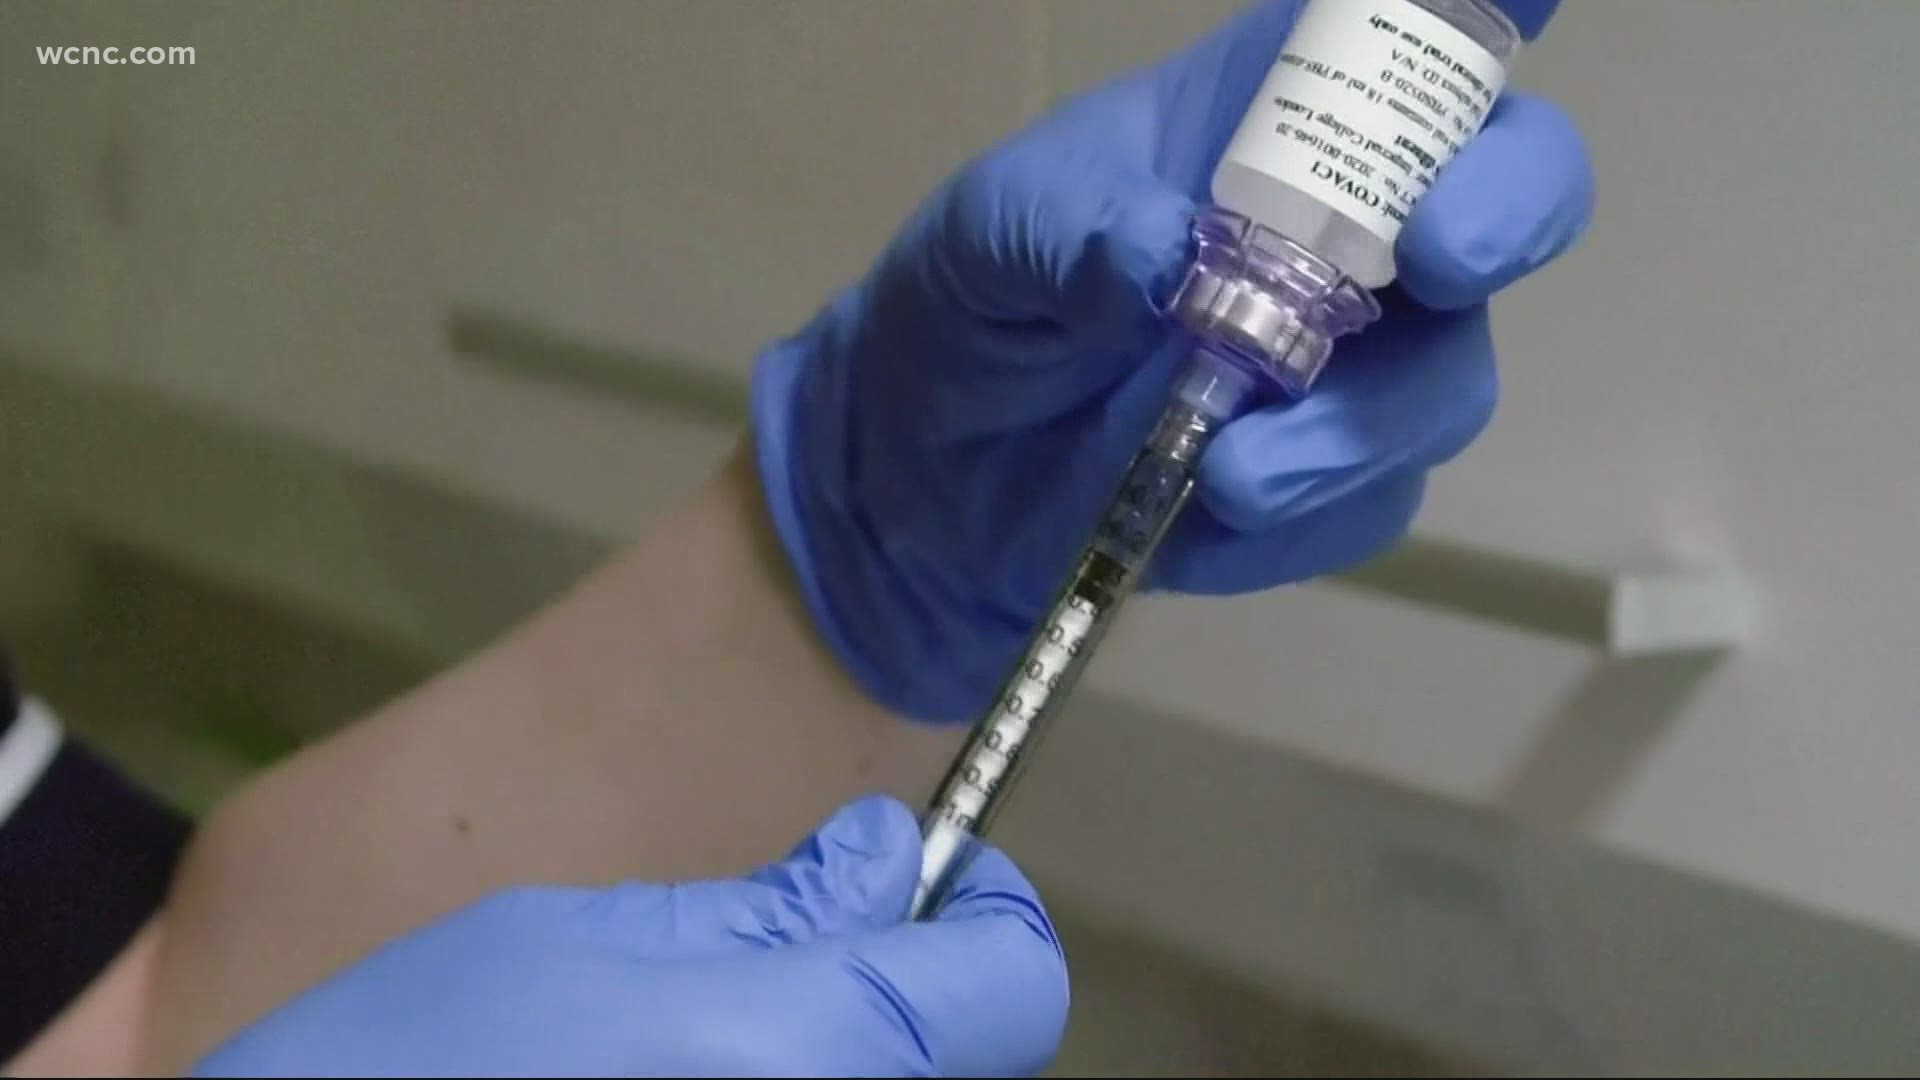 Gov. Roy Cooper is expected to make an announcement regarding Group 4 COVID-19 vaccinations in North Carolina Thursday afternoon.